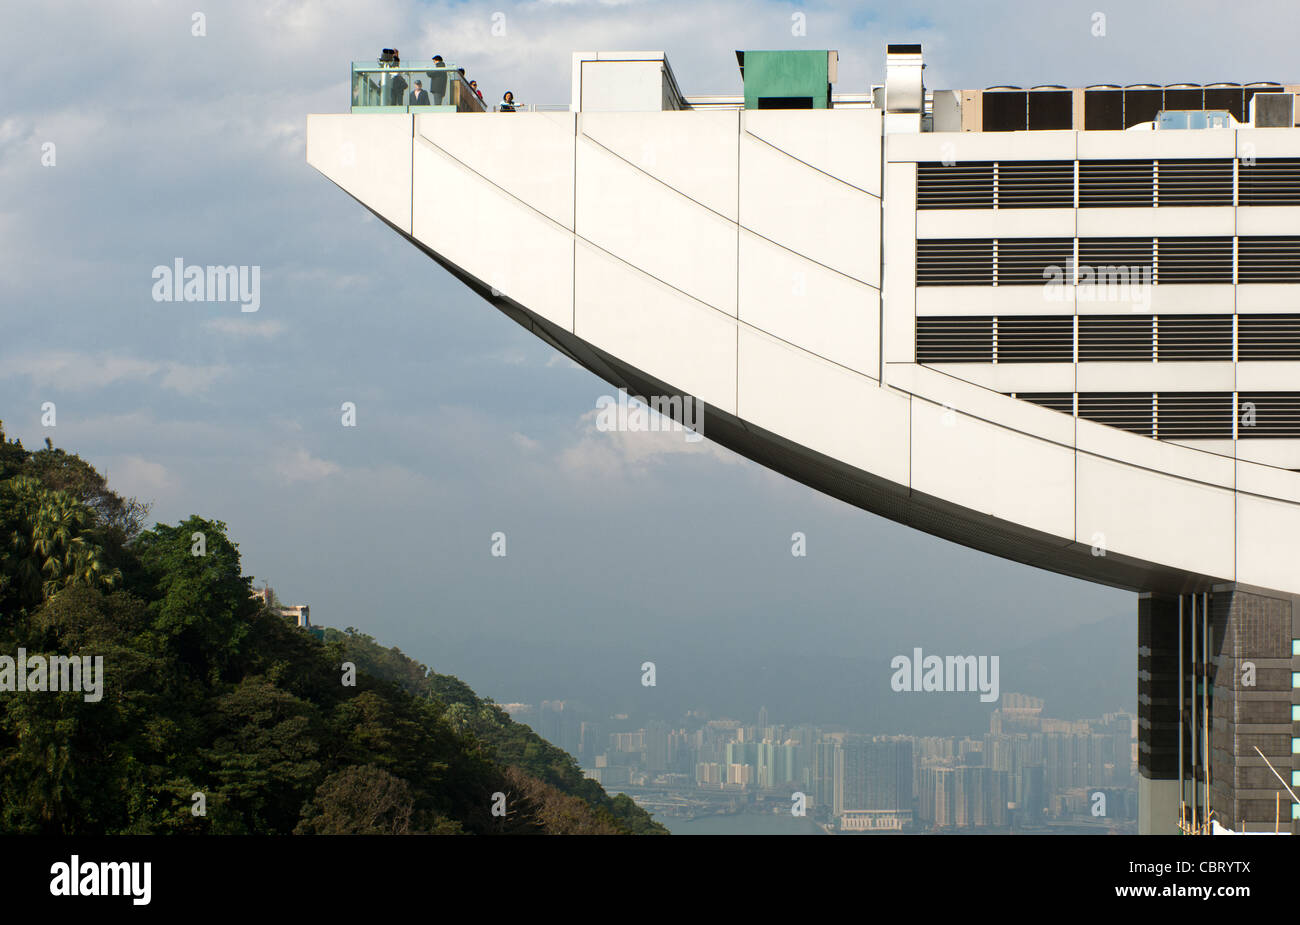 Details of the viewing platform of The Peak Tower on top of the Victoria Peak, Hong Kong Stock Photo